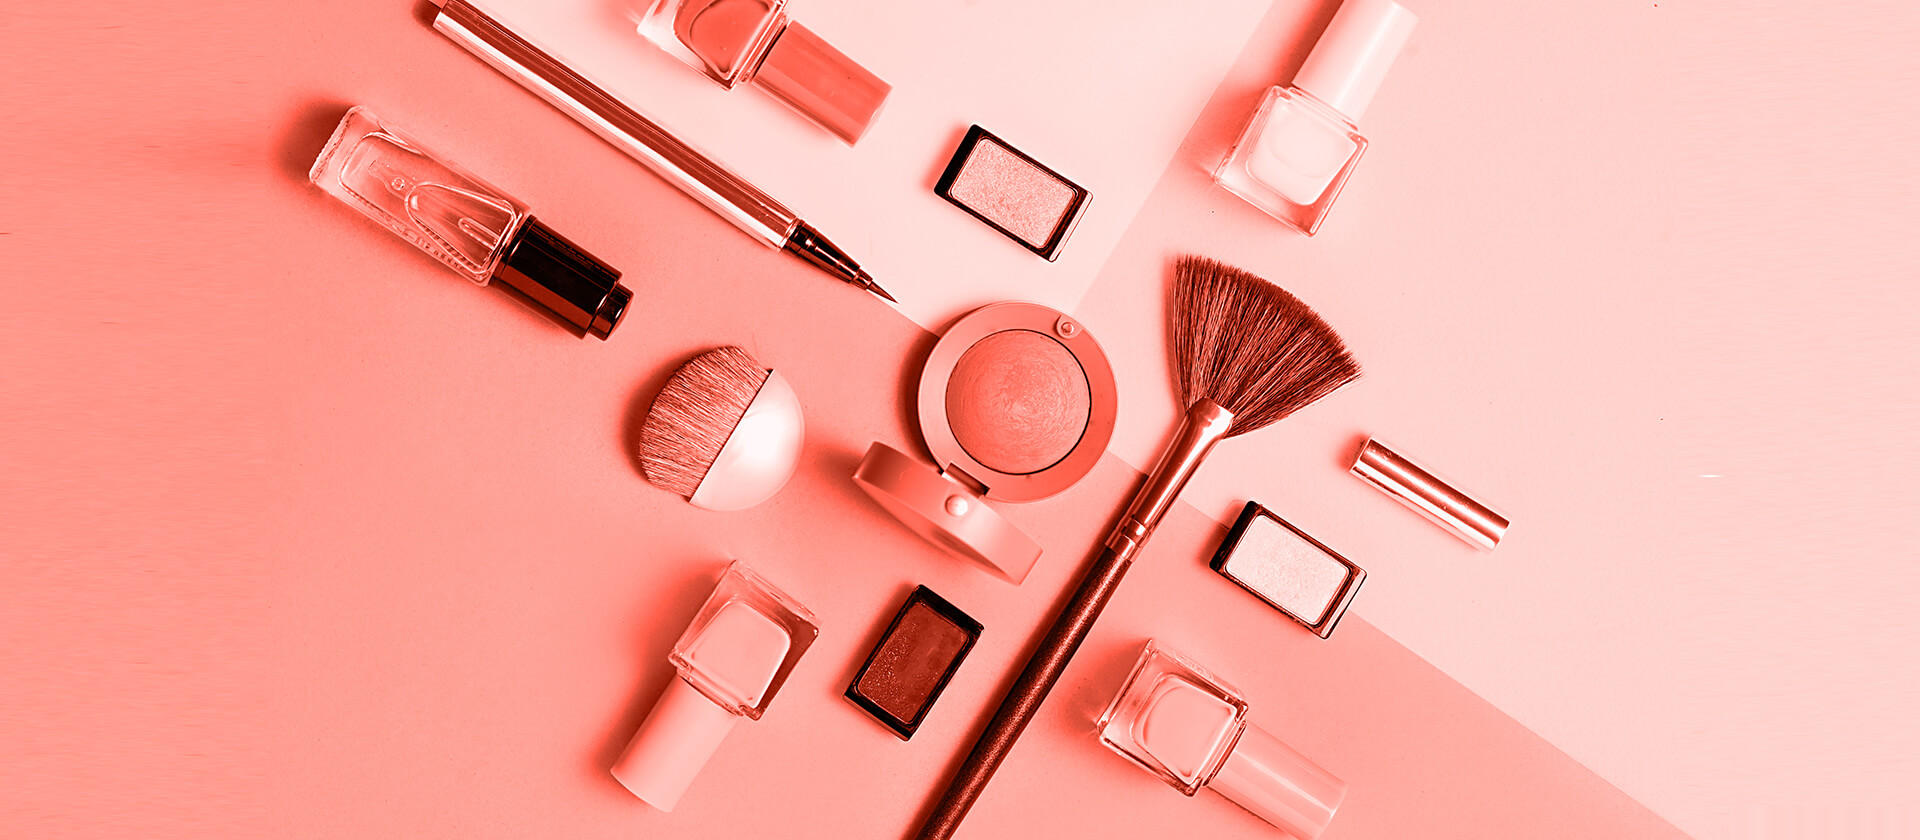 Benefit Cosmetics Jobs & Projects